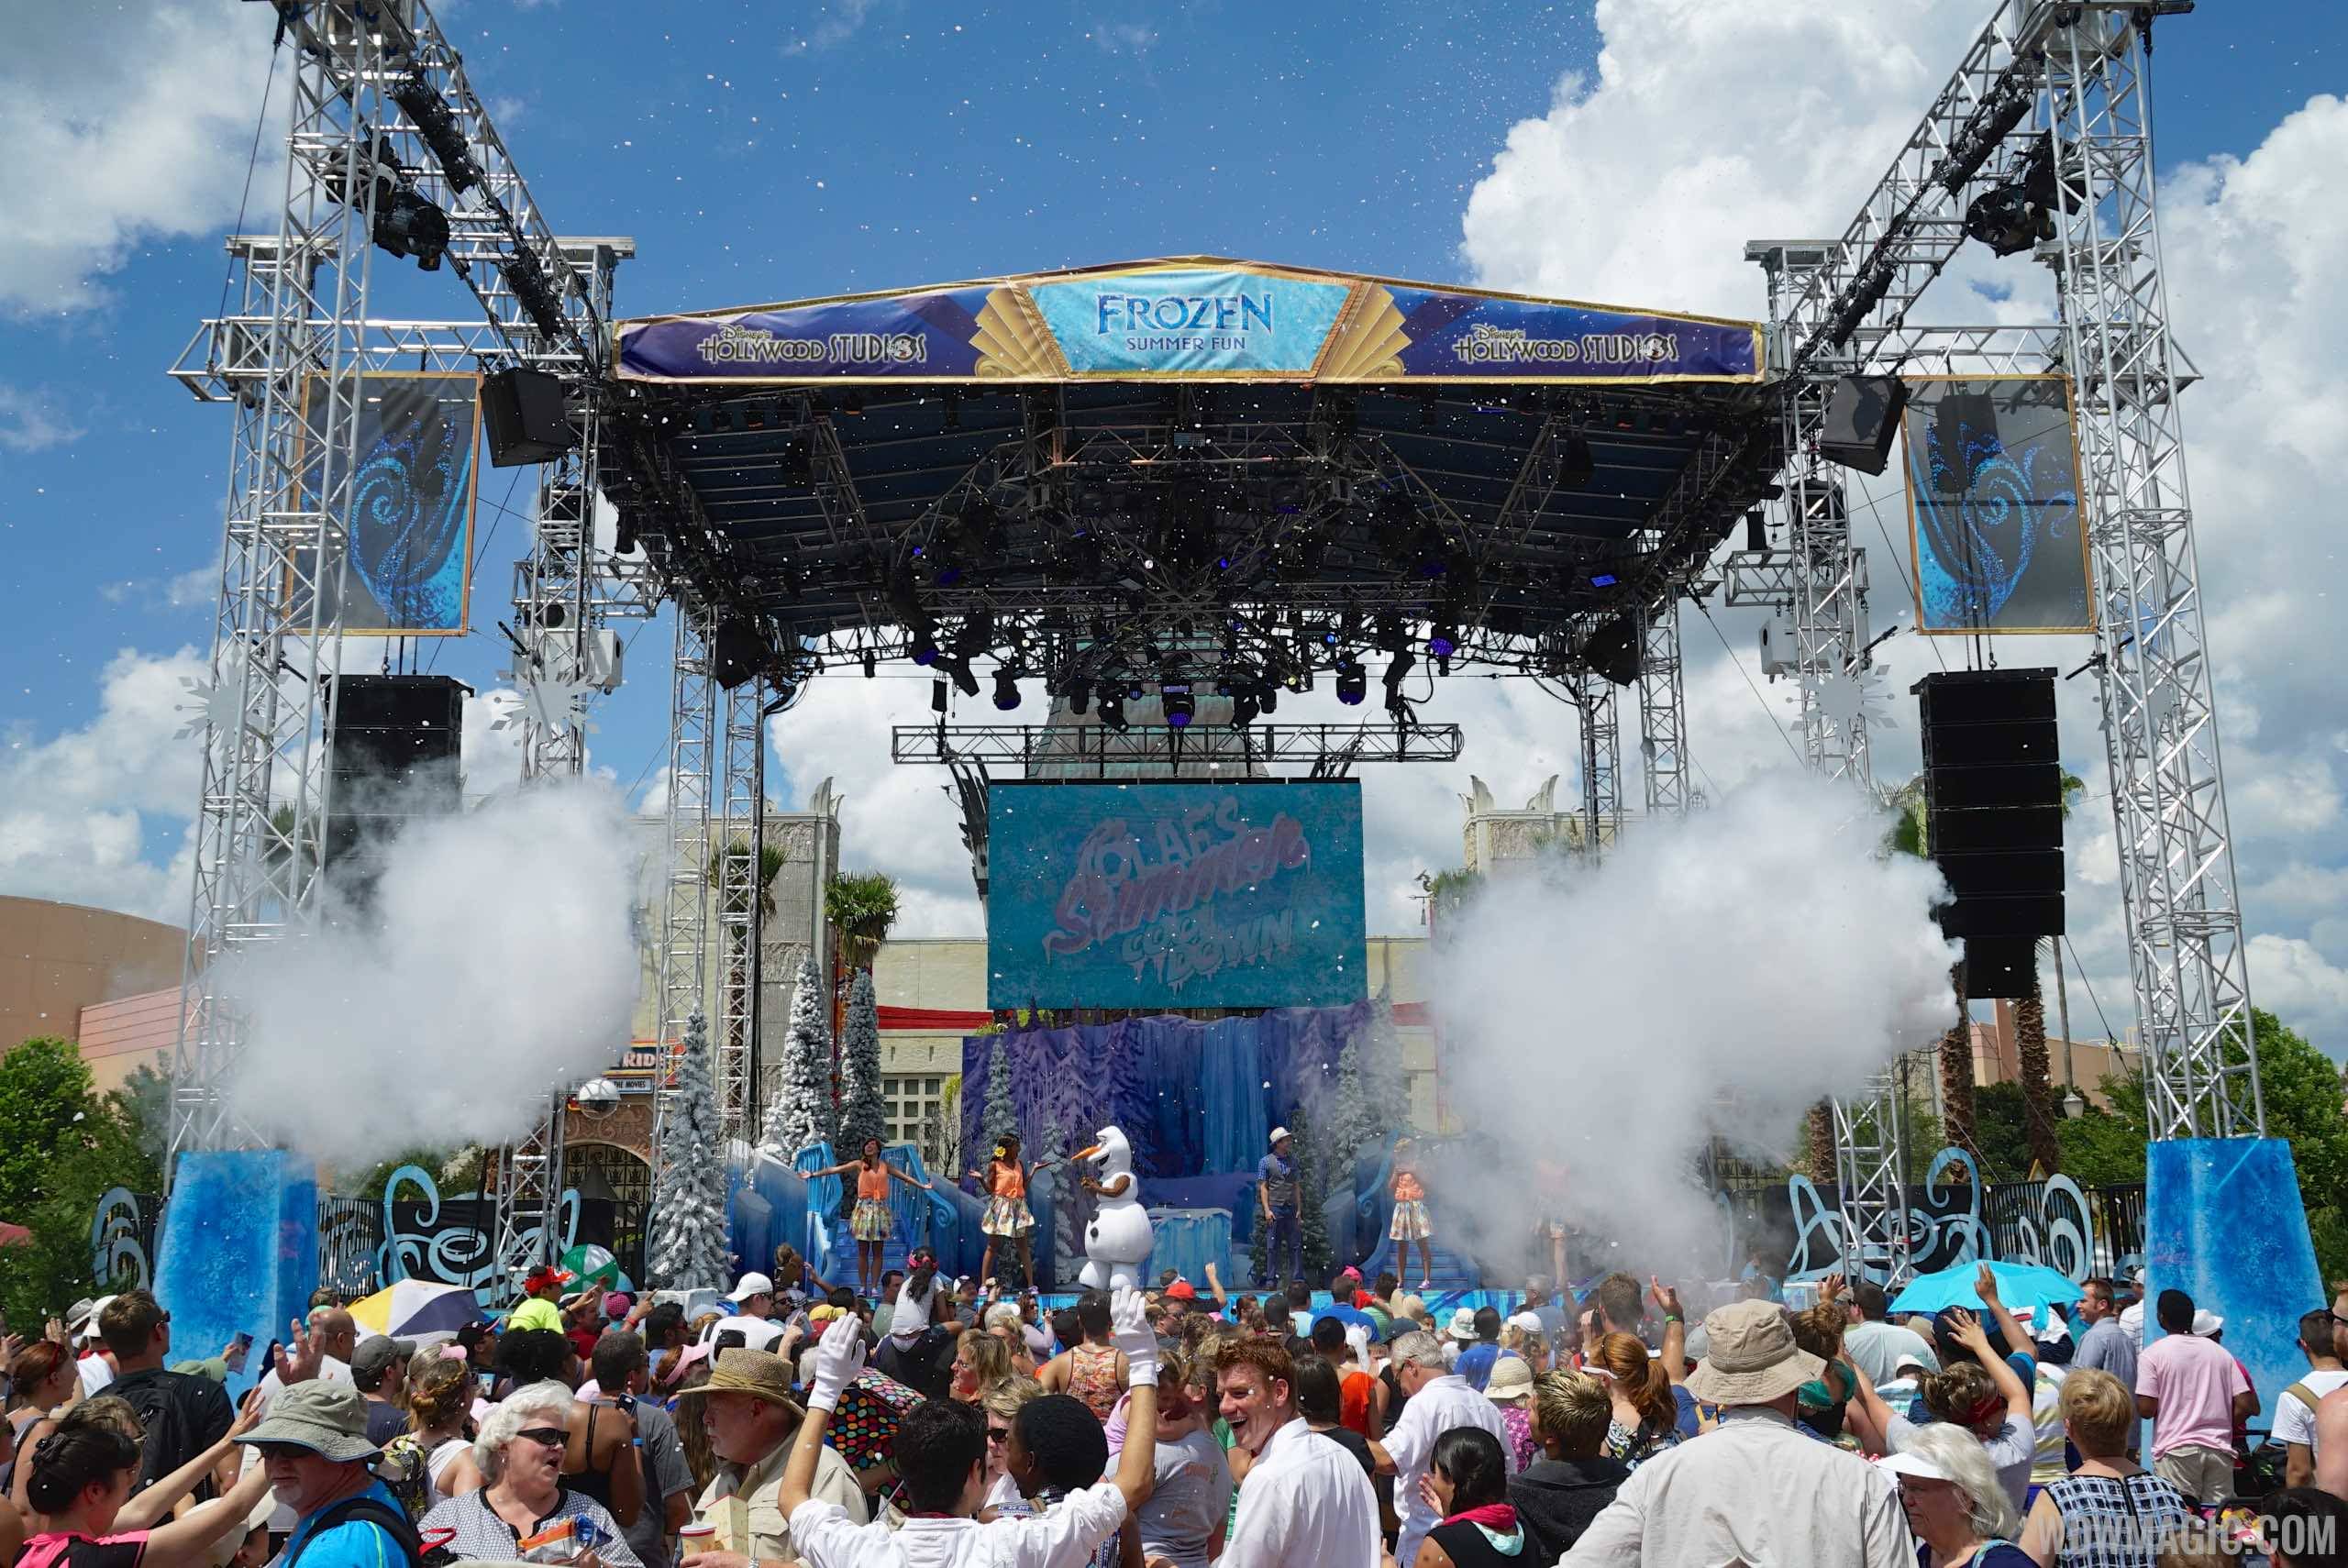 Final chance to see 'Frozen Summer Fun - Live at Disney's Hollywood Studios' this weekend